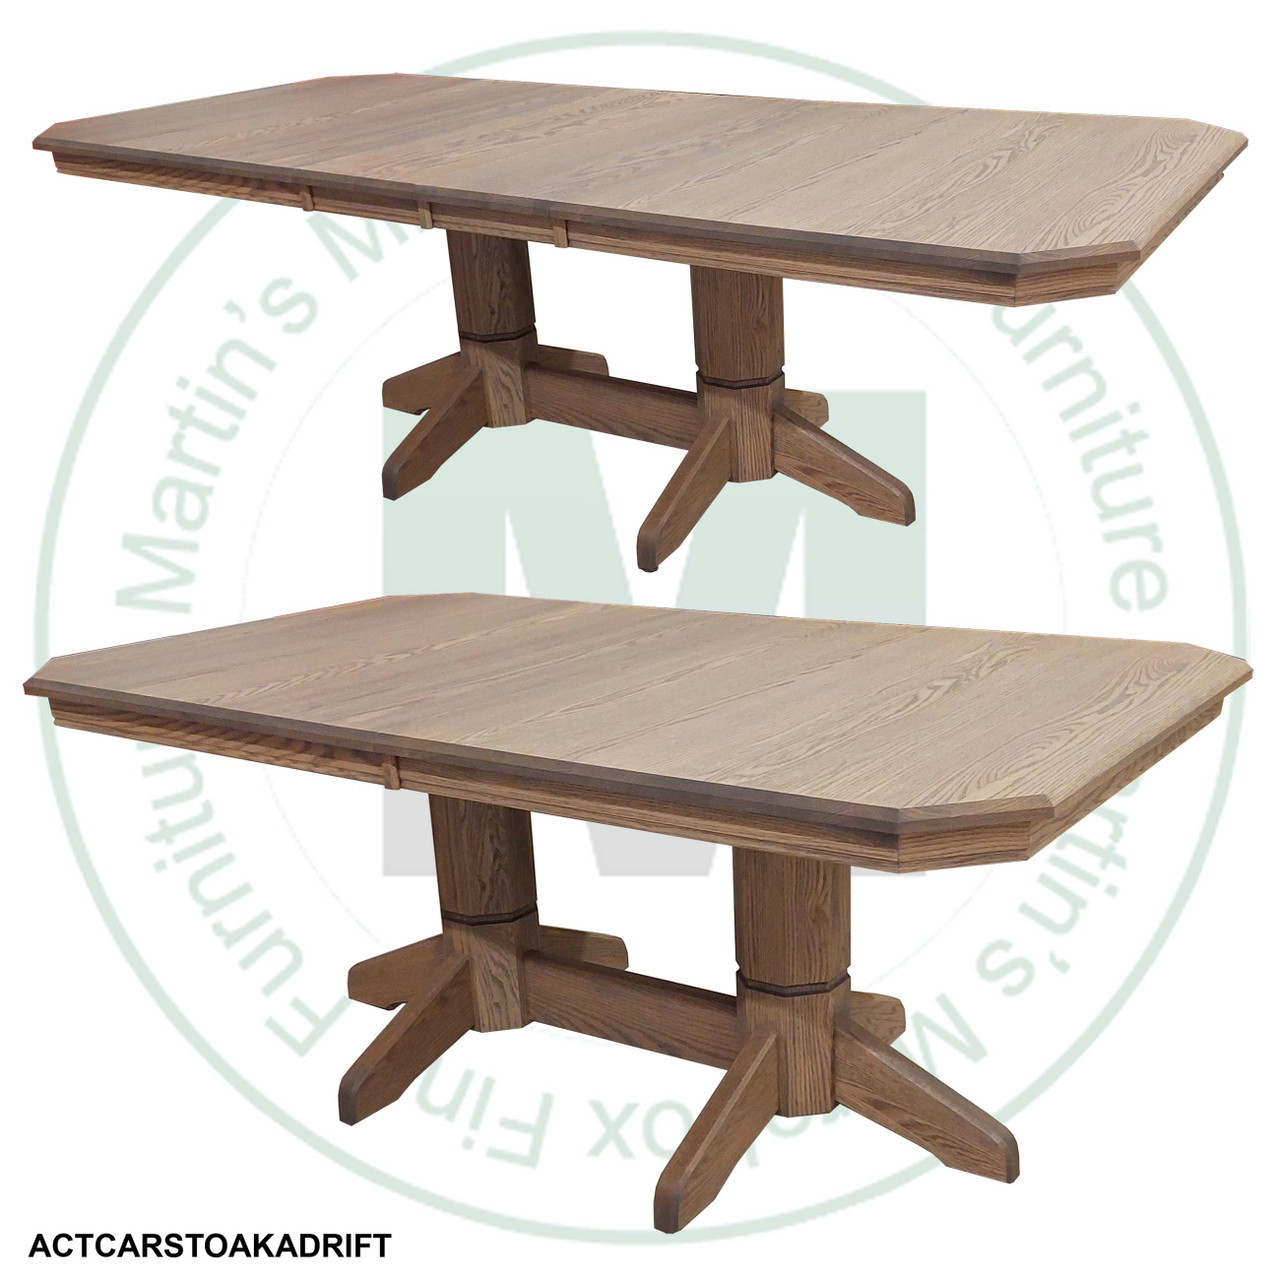 Oak Urban Classic Double Pedestal Table 48''D x 84''W x 30''H With 2 - 12'' Leaves